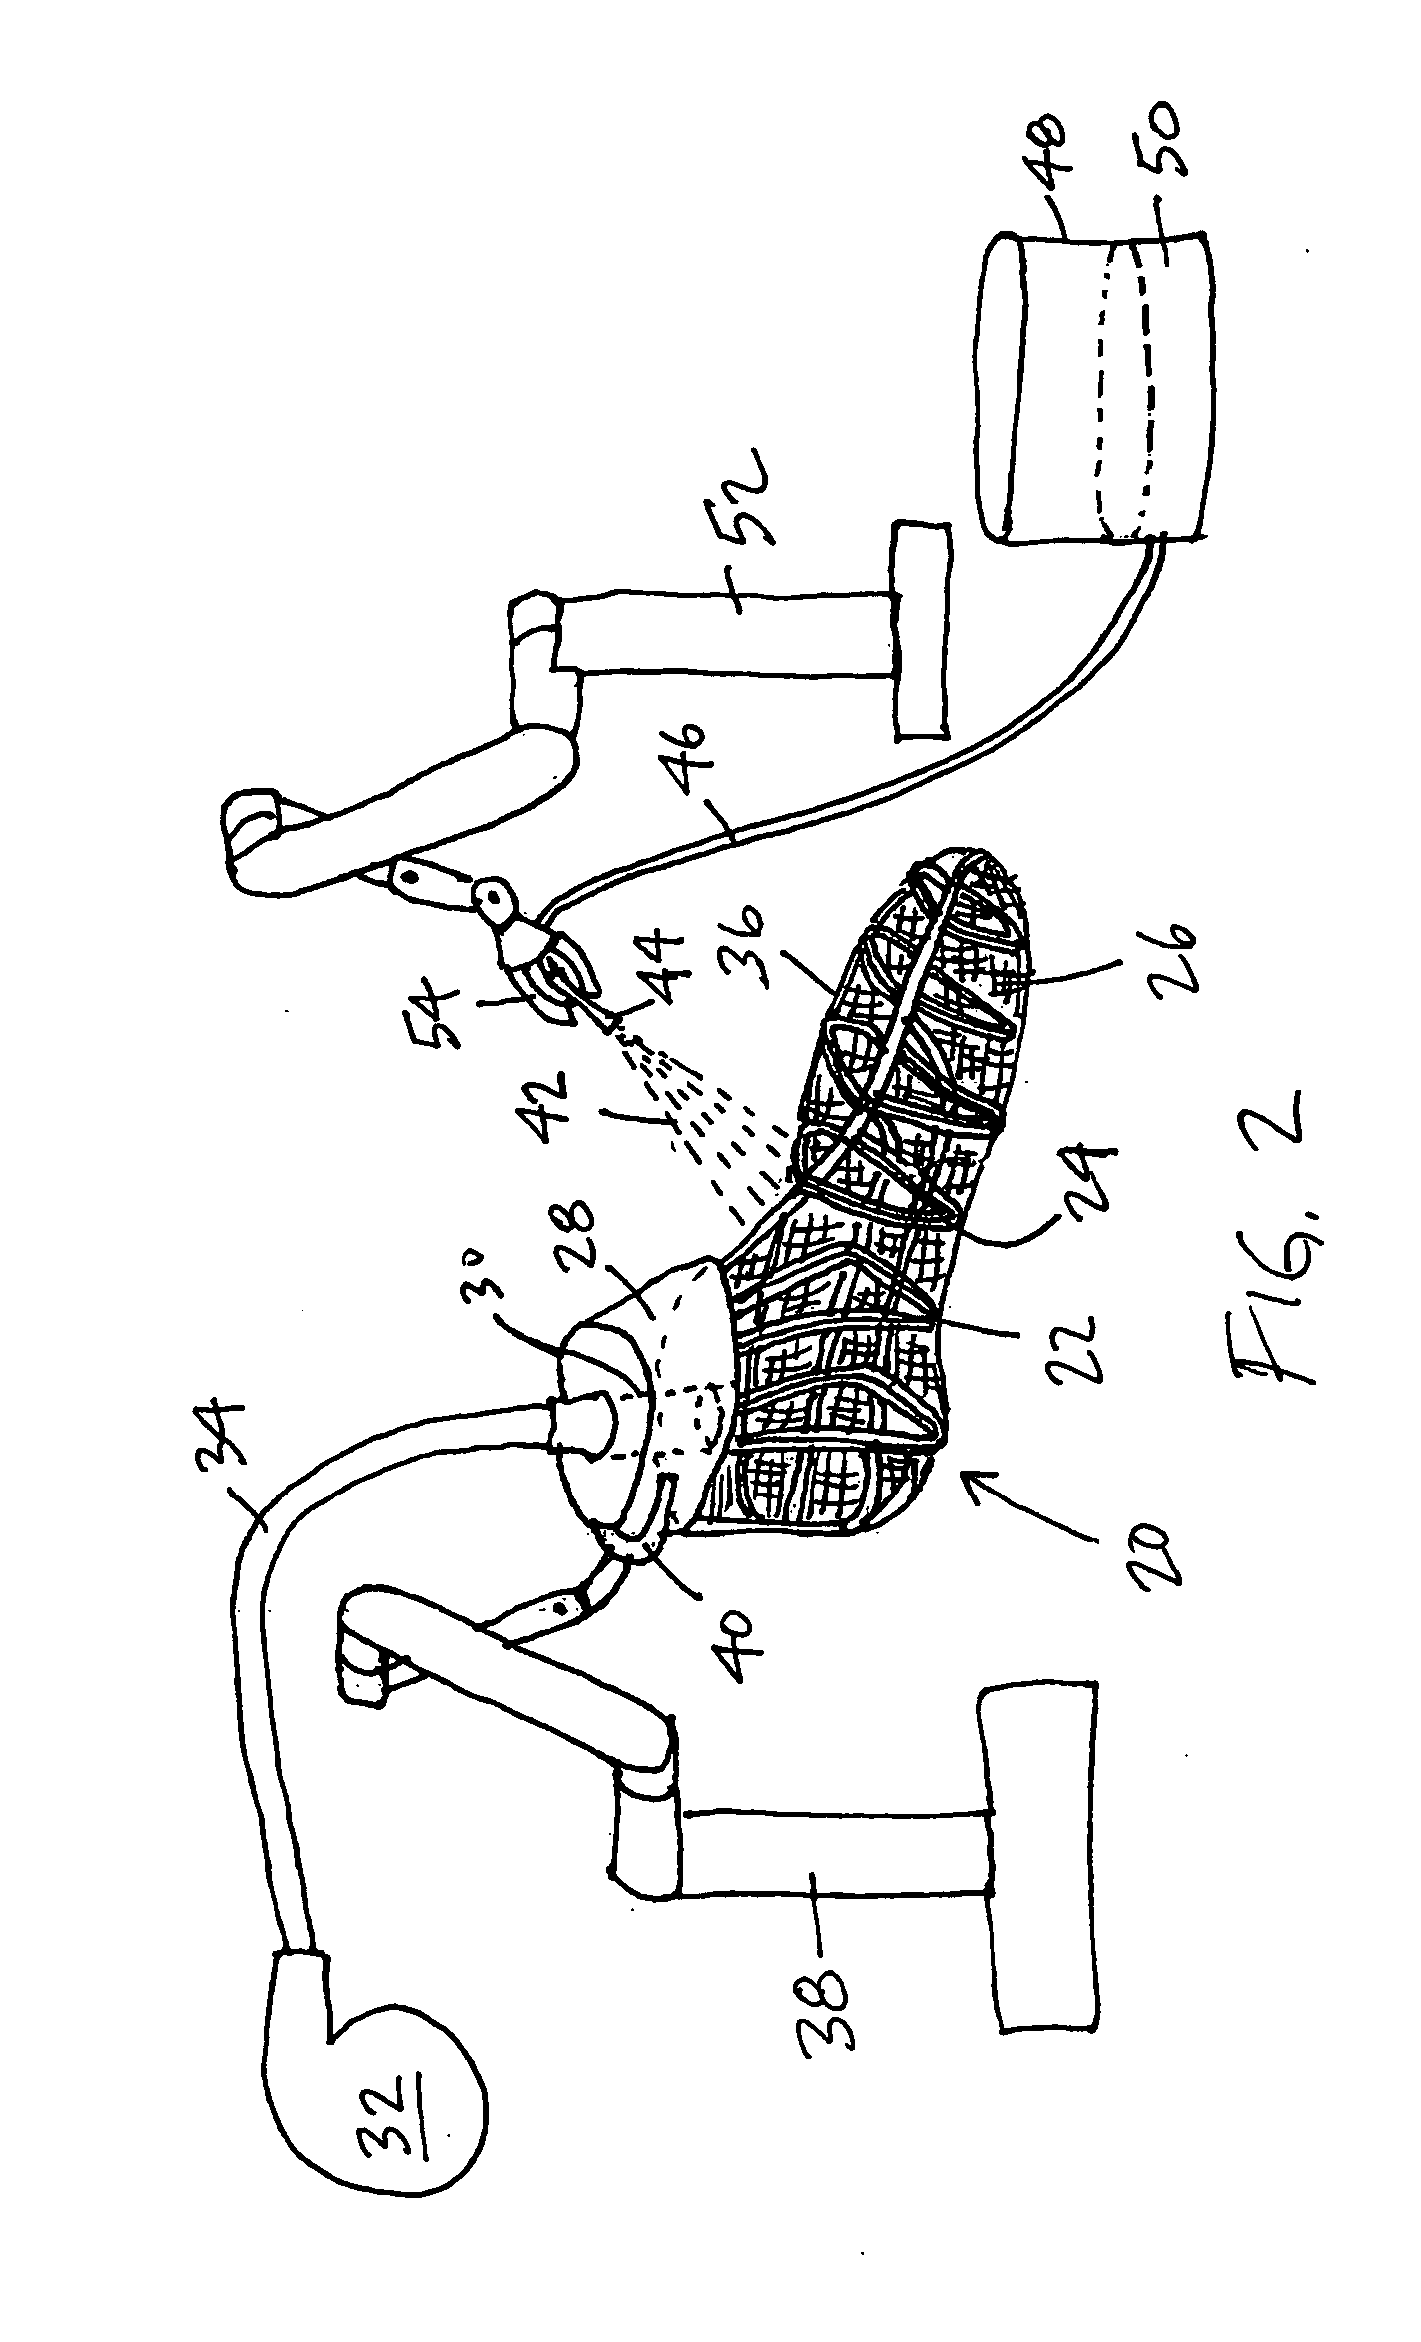 Article of footwear of nonwoven material and method of manufacturing same